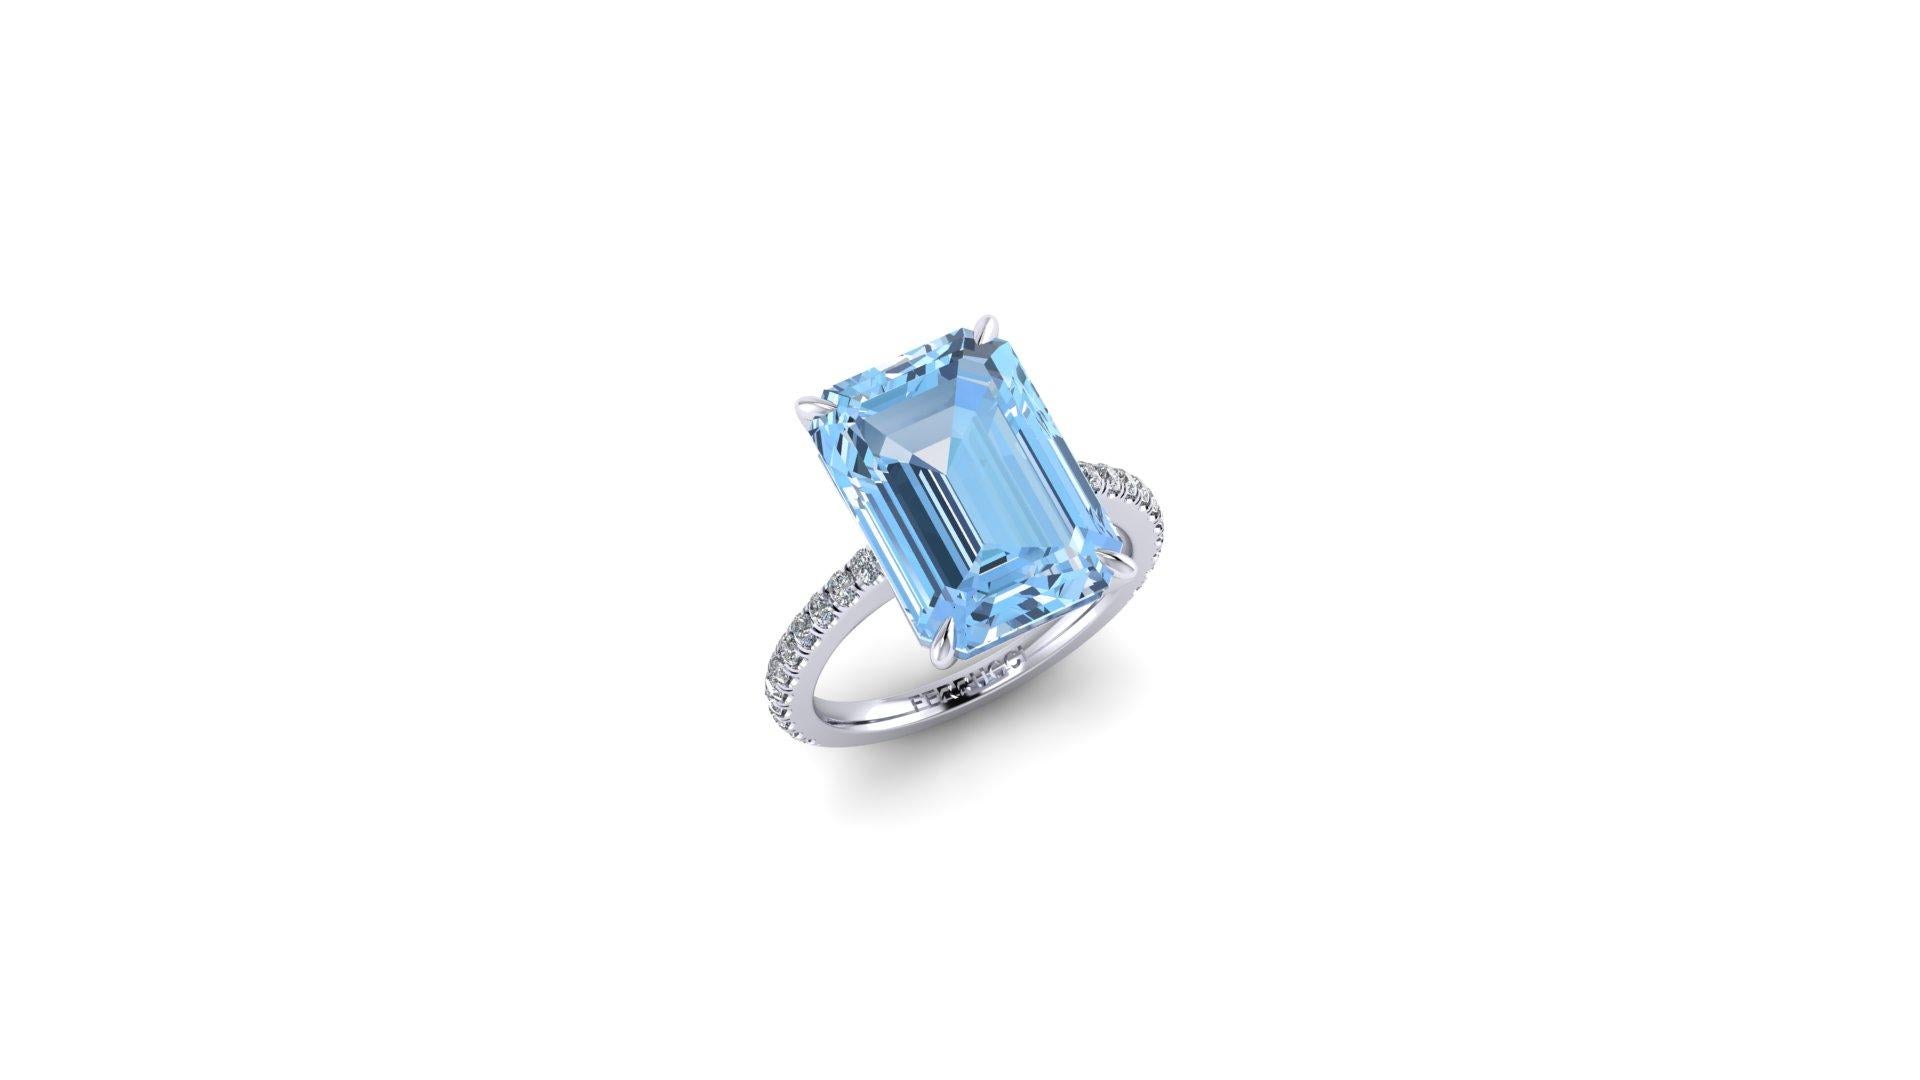 An exquisite 6.21 carat Aquamarine, emerald cut, very high quality color, eye clean gem, accompanied a pave' of bright diamonds of approximately  total carat weight of 0.38 carat, set in an hand crafted, delicate and sophisticated looking Platinum